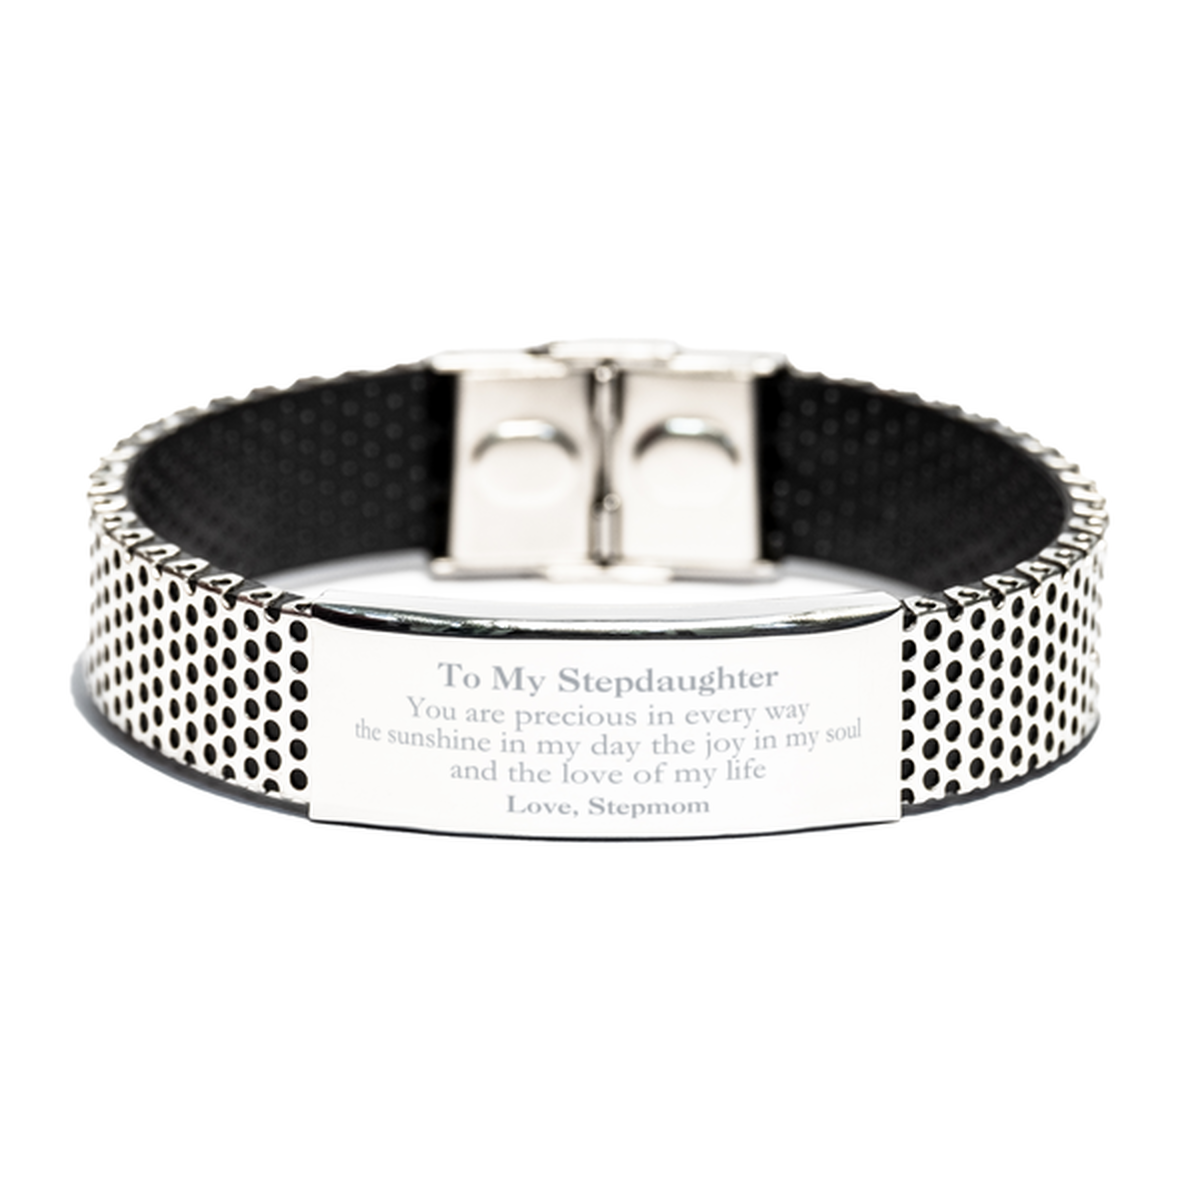 Graduation Gifts for Stepdaughter Stainless Steel Bracelet Present from Stepmom, Christmas Stepdaughter Birthday Gifts Stepdaughter You are precious in every way the sunshine in my day. Love, Stepmom